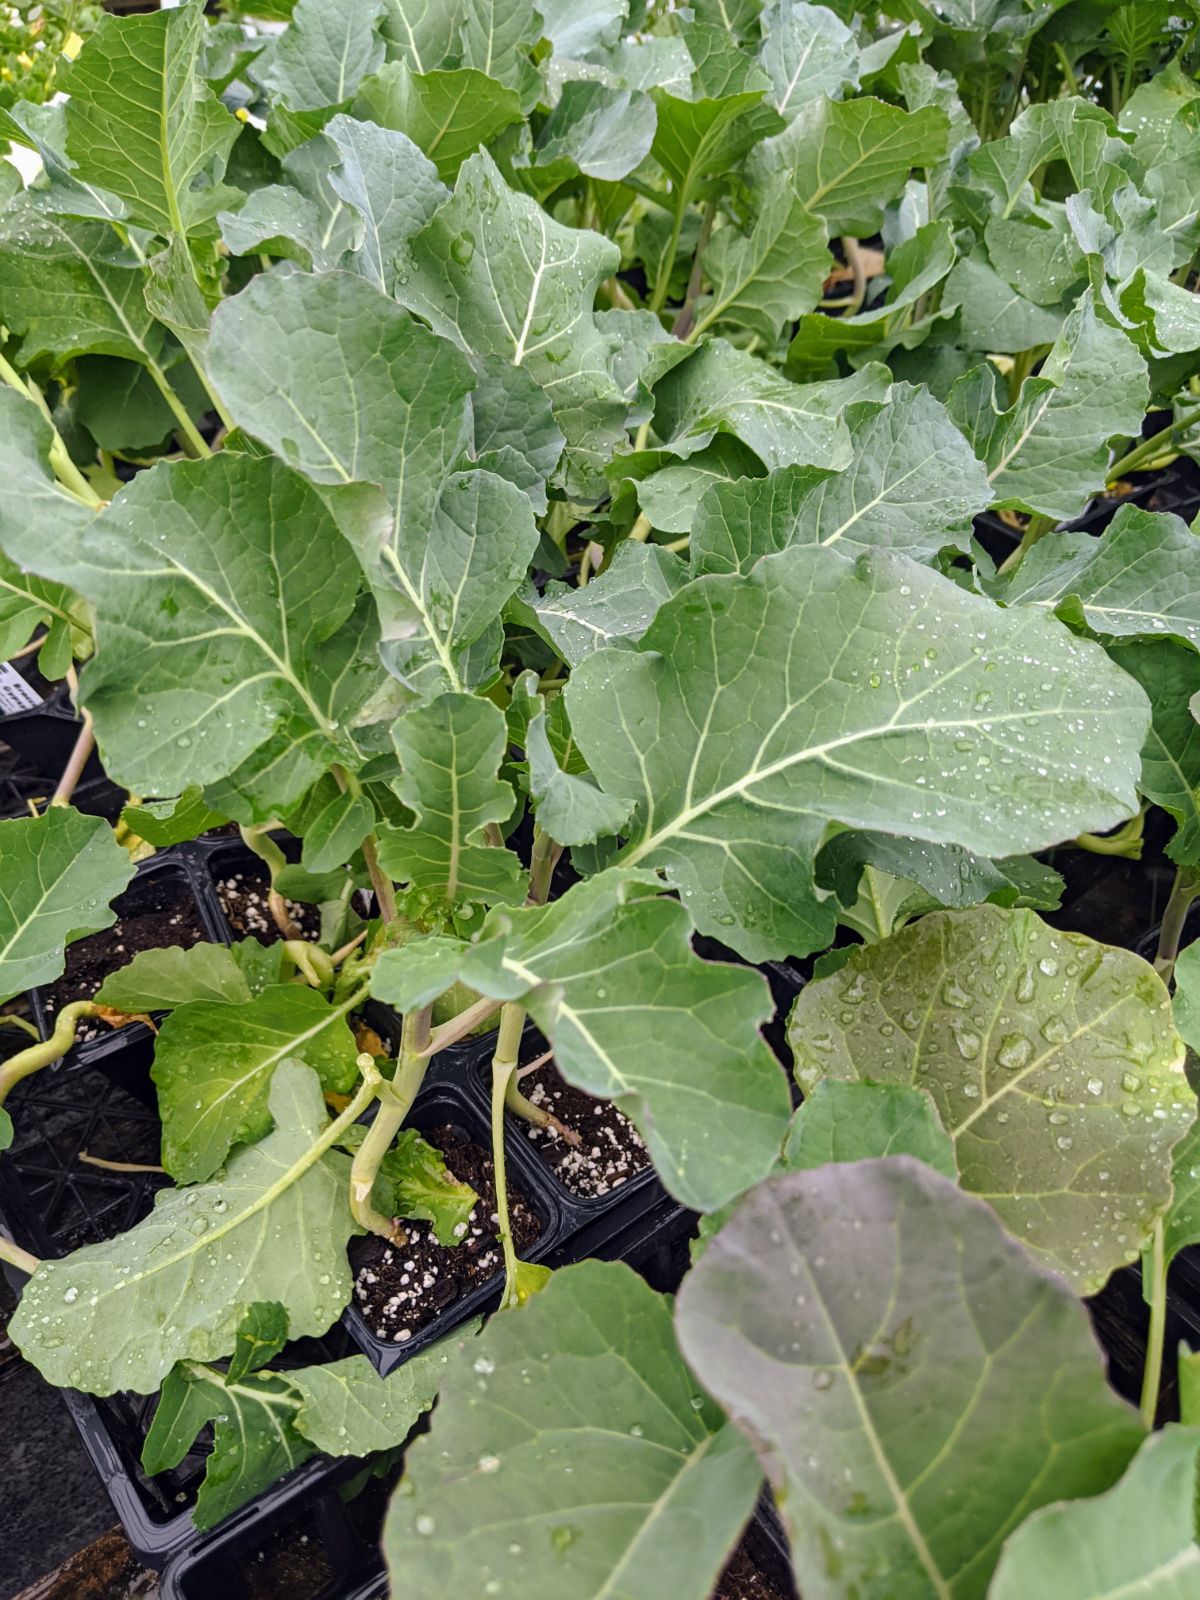 Gypsy broccoli starter plants from Glick's Greenhouse in Oley, Pennsylvania